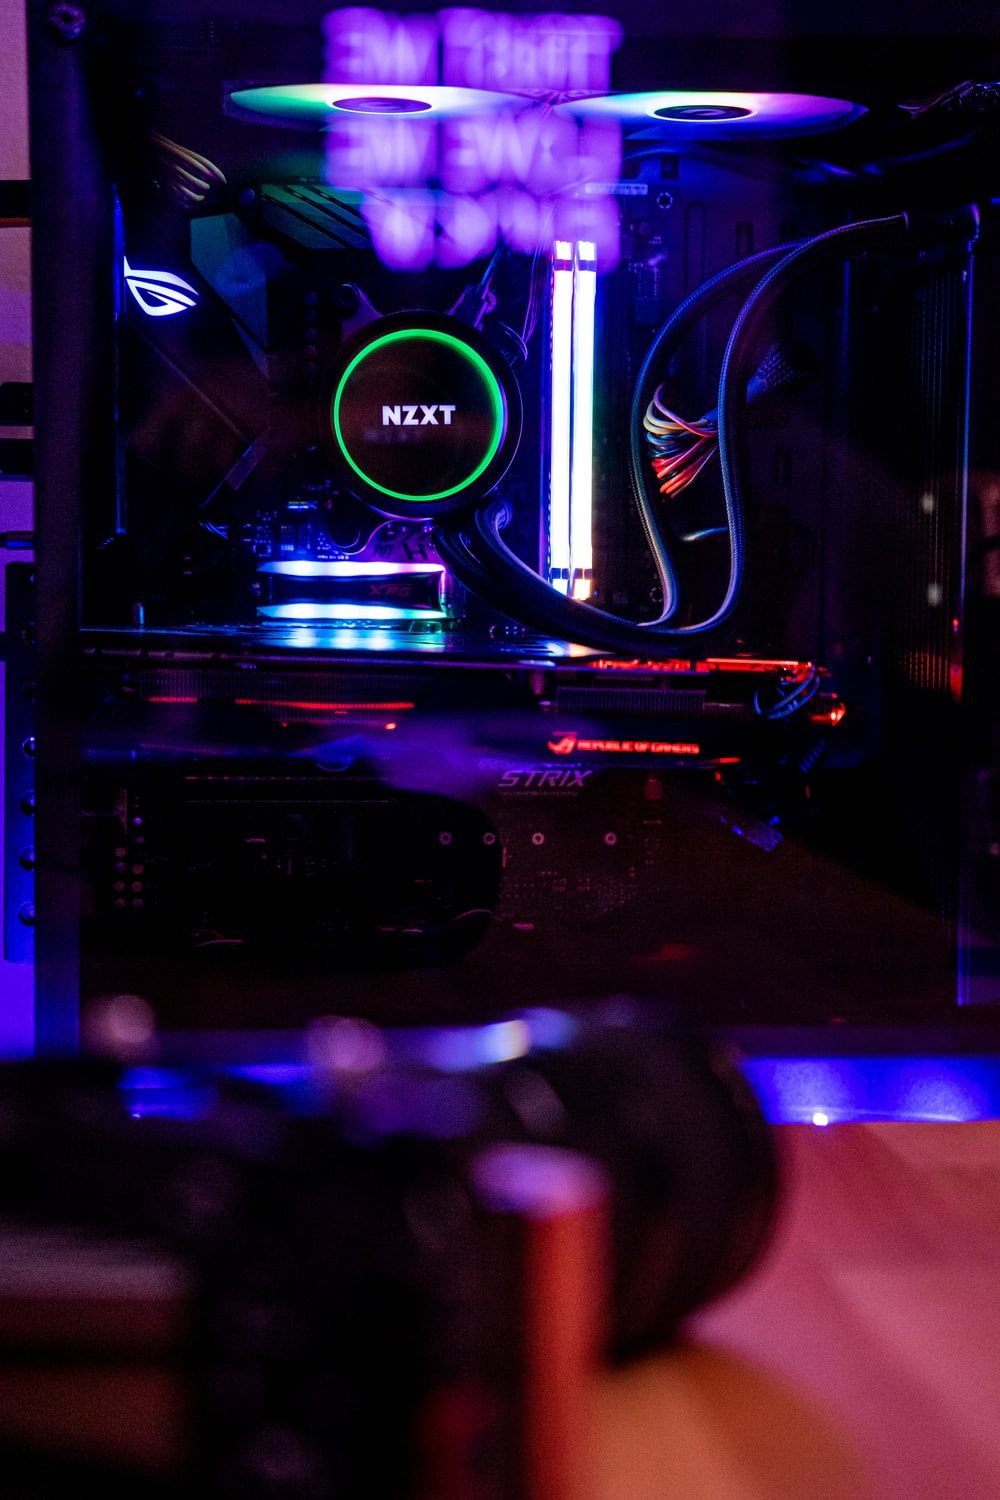 Pc Build Picture. Download Free Image